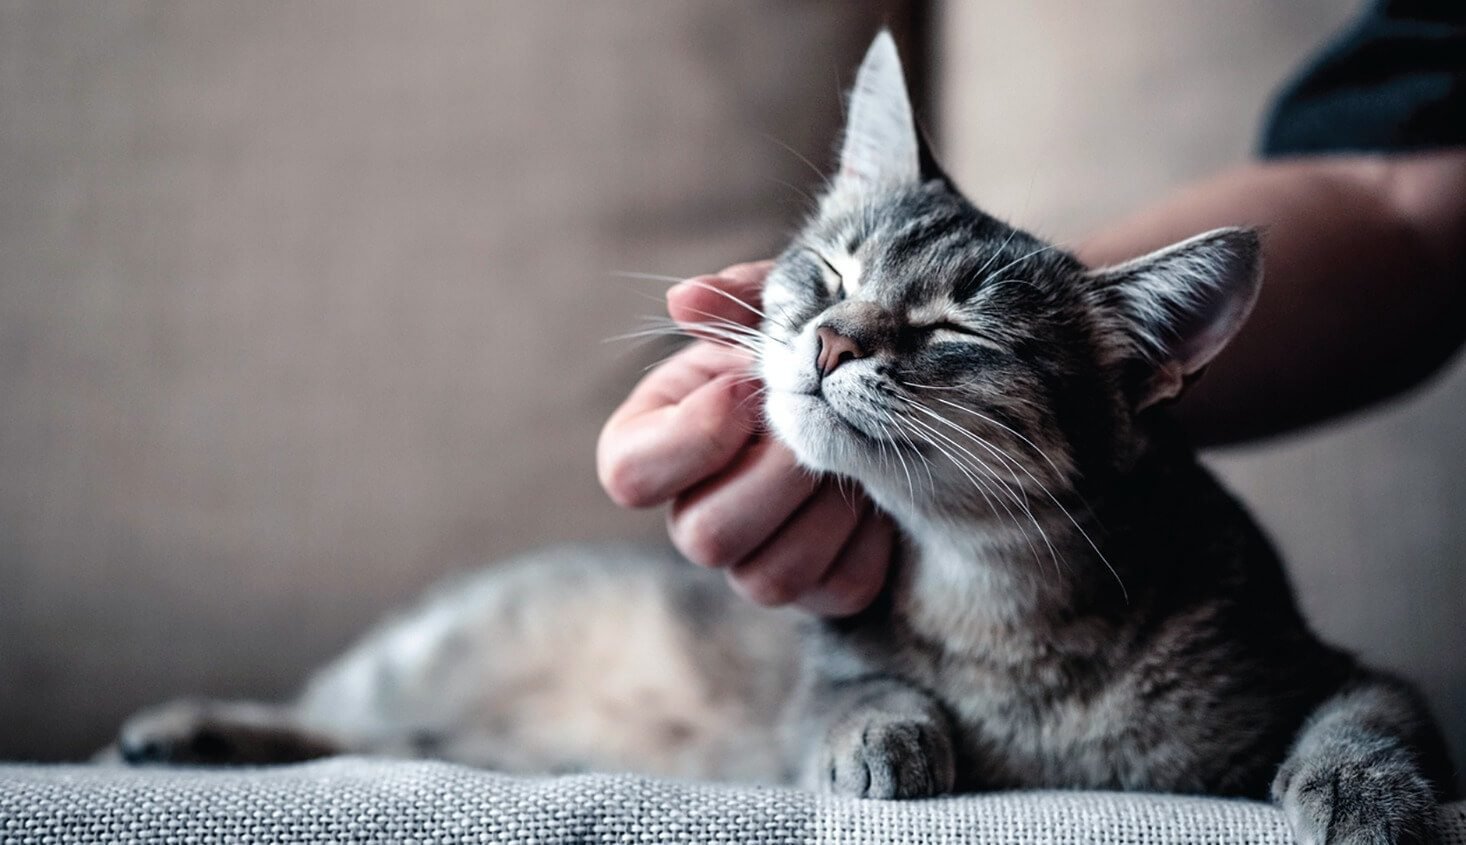 Communication and emotional support can be very useful for cat owners caring a kitty with lymphoma